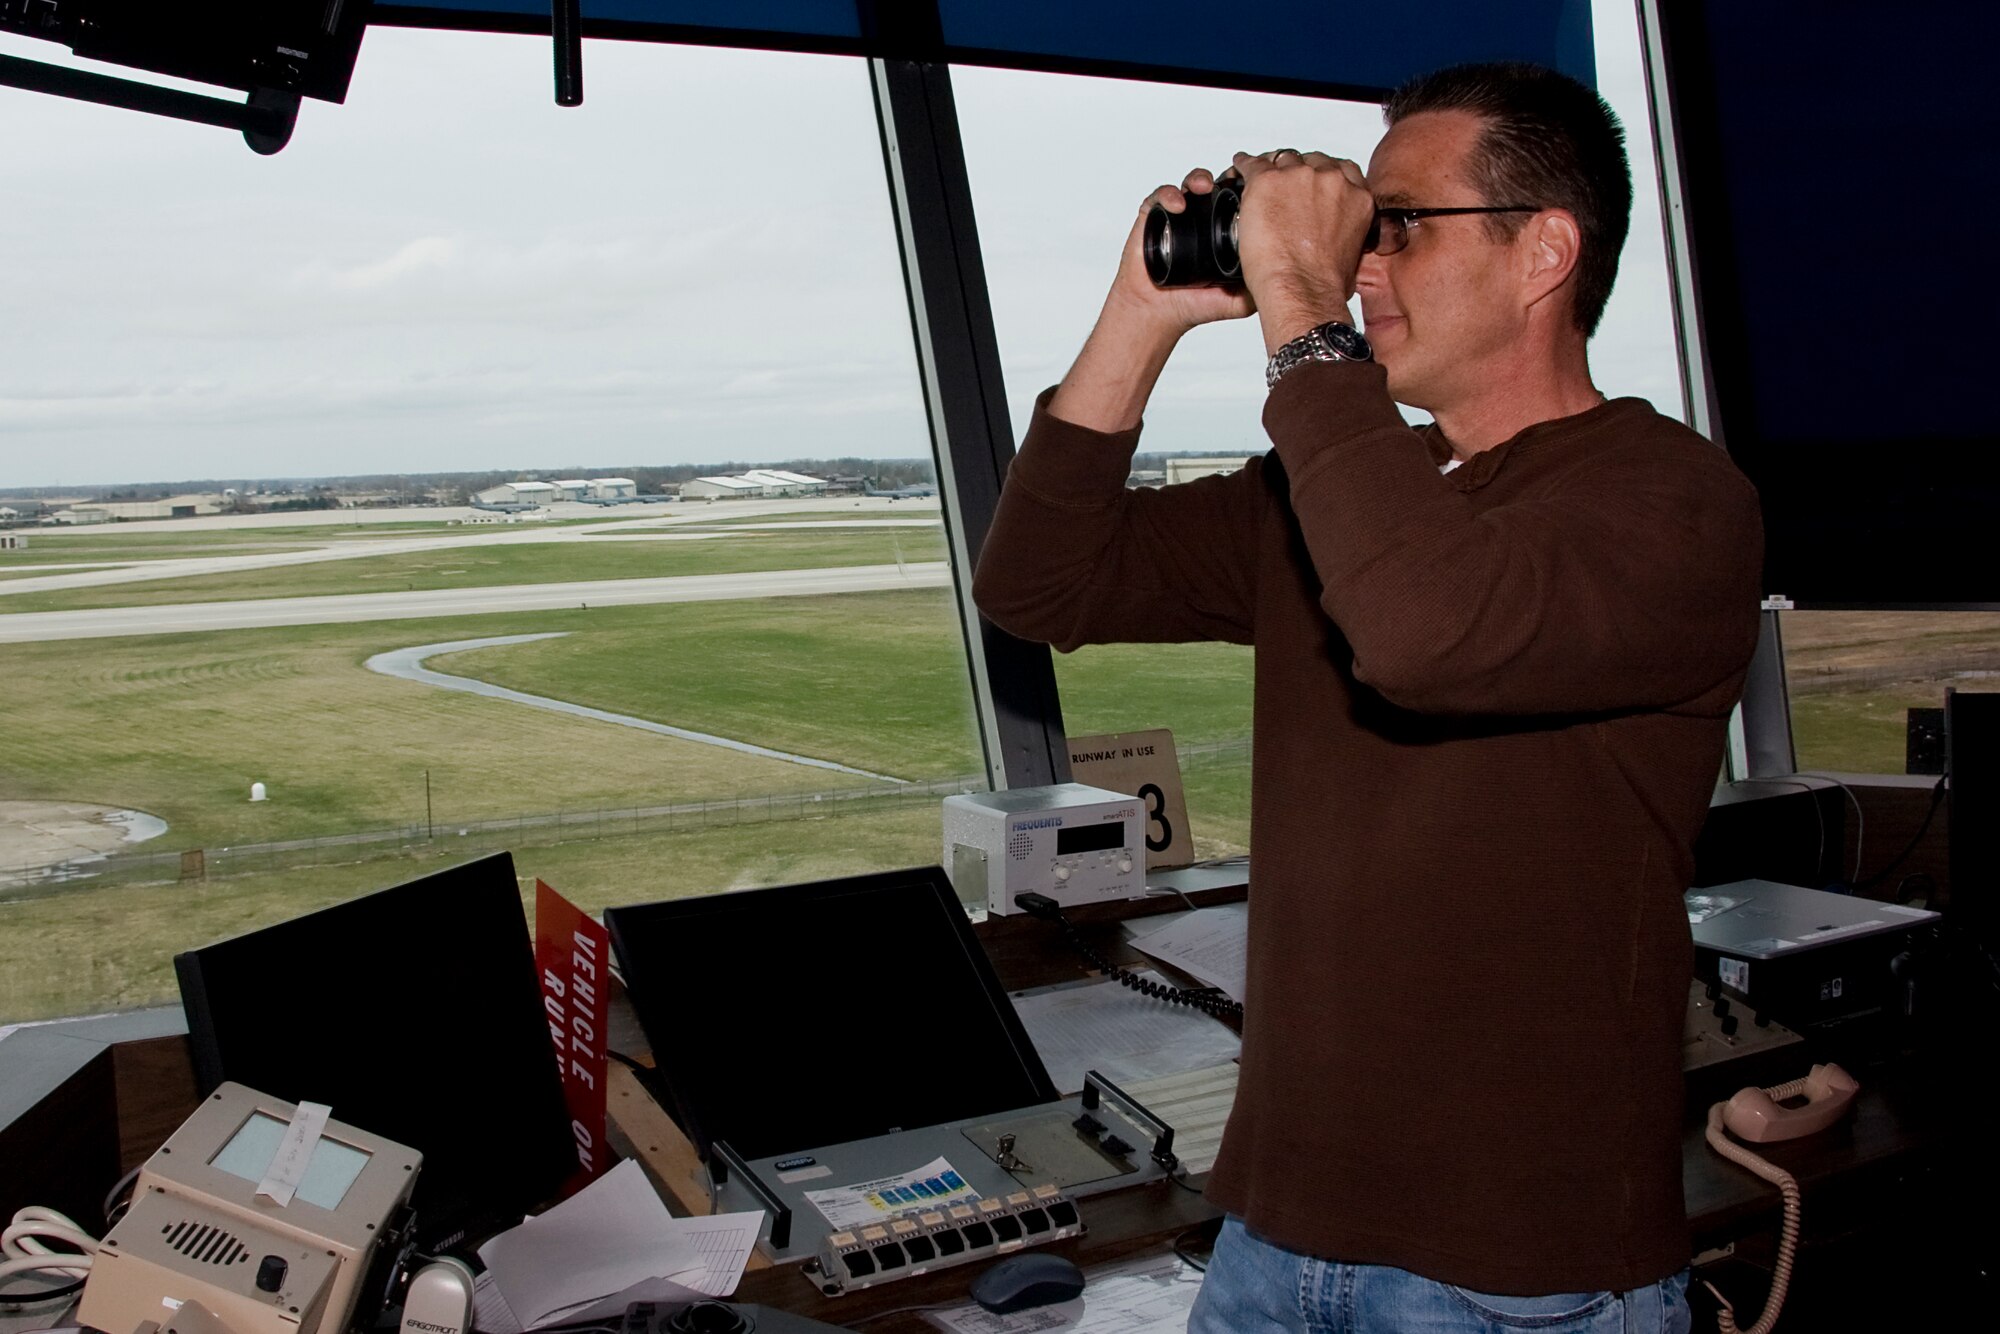 GRISSOM AIR RESERVE BASE, Ind. -- Using binoculars, Robert Moore, scans across a flight line at Grissom Air Reserve Base, Ind., April 11. Mr. Moore is a 434th Operations Support Squadron air traffic control training and standardization manager. All of Grissom's air traffic controllers are dual-qualified for both radar approach control and tower control operations. The ATC tower Mr. Moore is standing in was built in 1965 and is being replaced with a new tower that is scheduled for completion in 2012. (U.S. Air Force photo/Tech. Sgt. Mark R. W. Orders-Woempner) 
